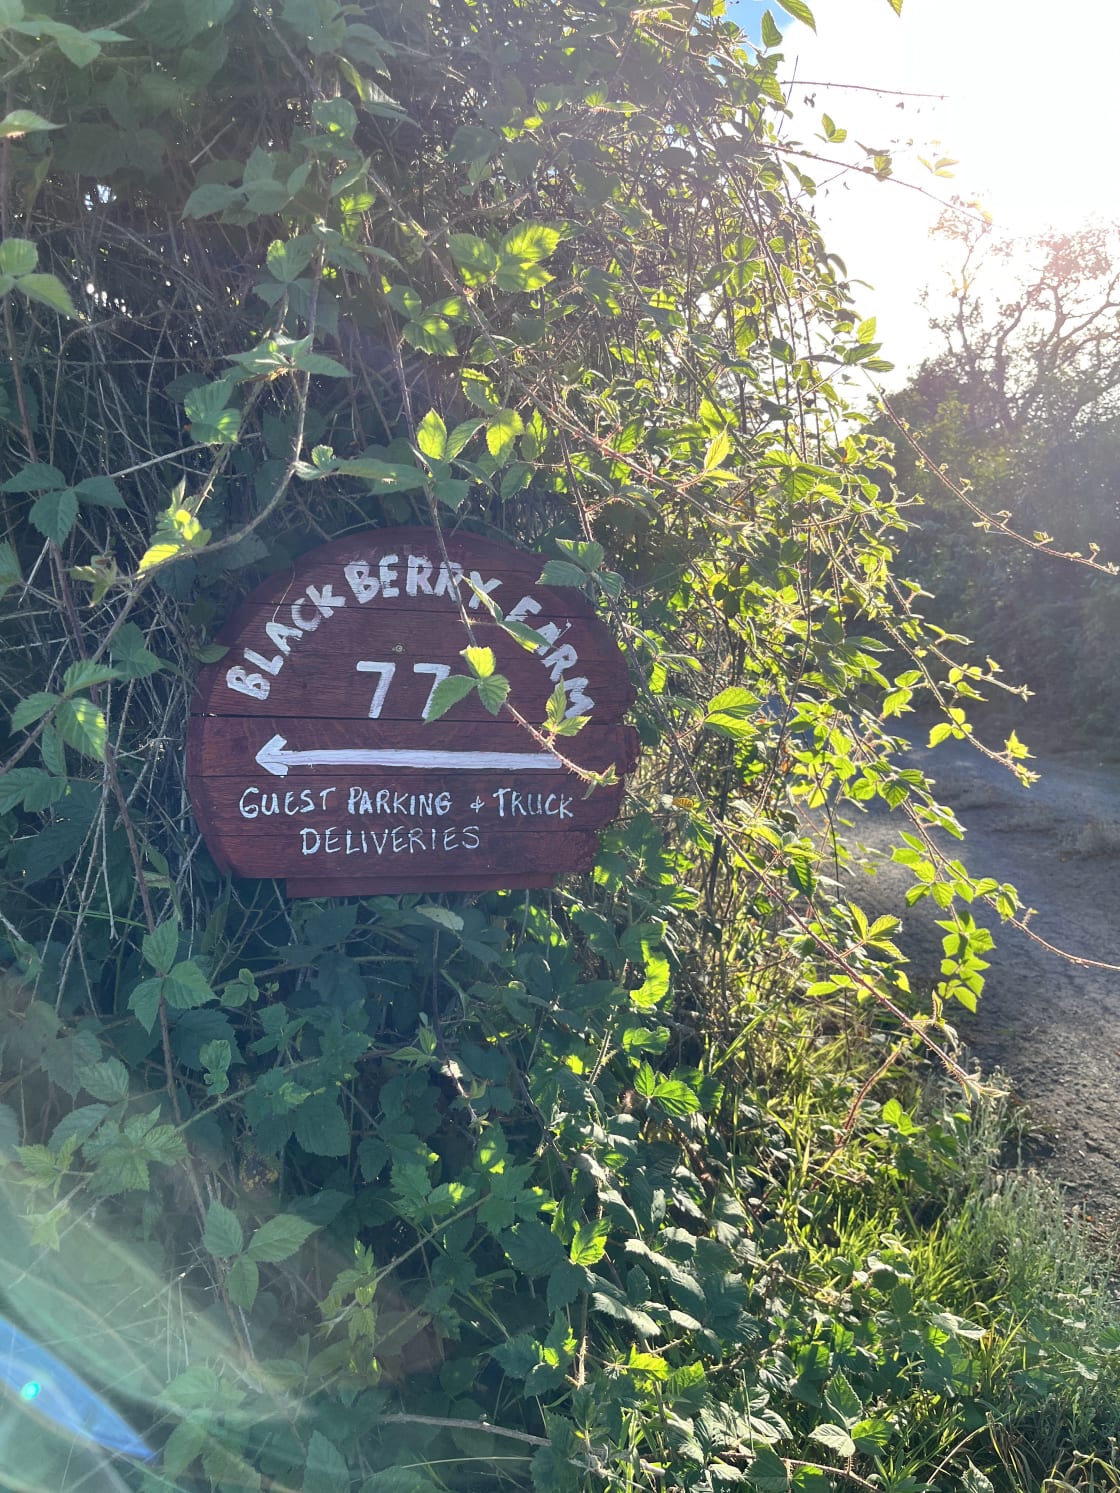 You’ve arrived!!! Look for this sign about 100 yds down a paved lane. As you drive down the lane you’ll see a tall white fence on right and a hedgerow of wild Blackberries on the left.